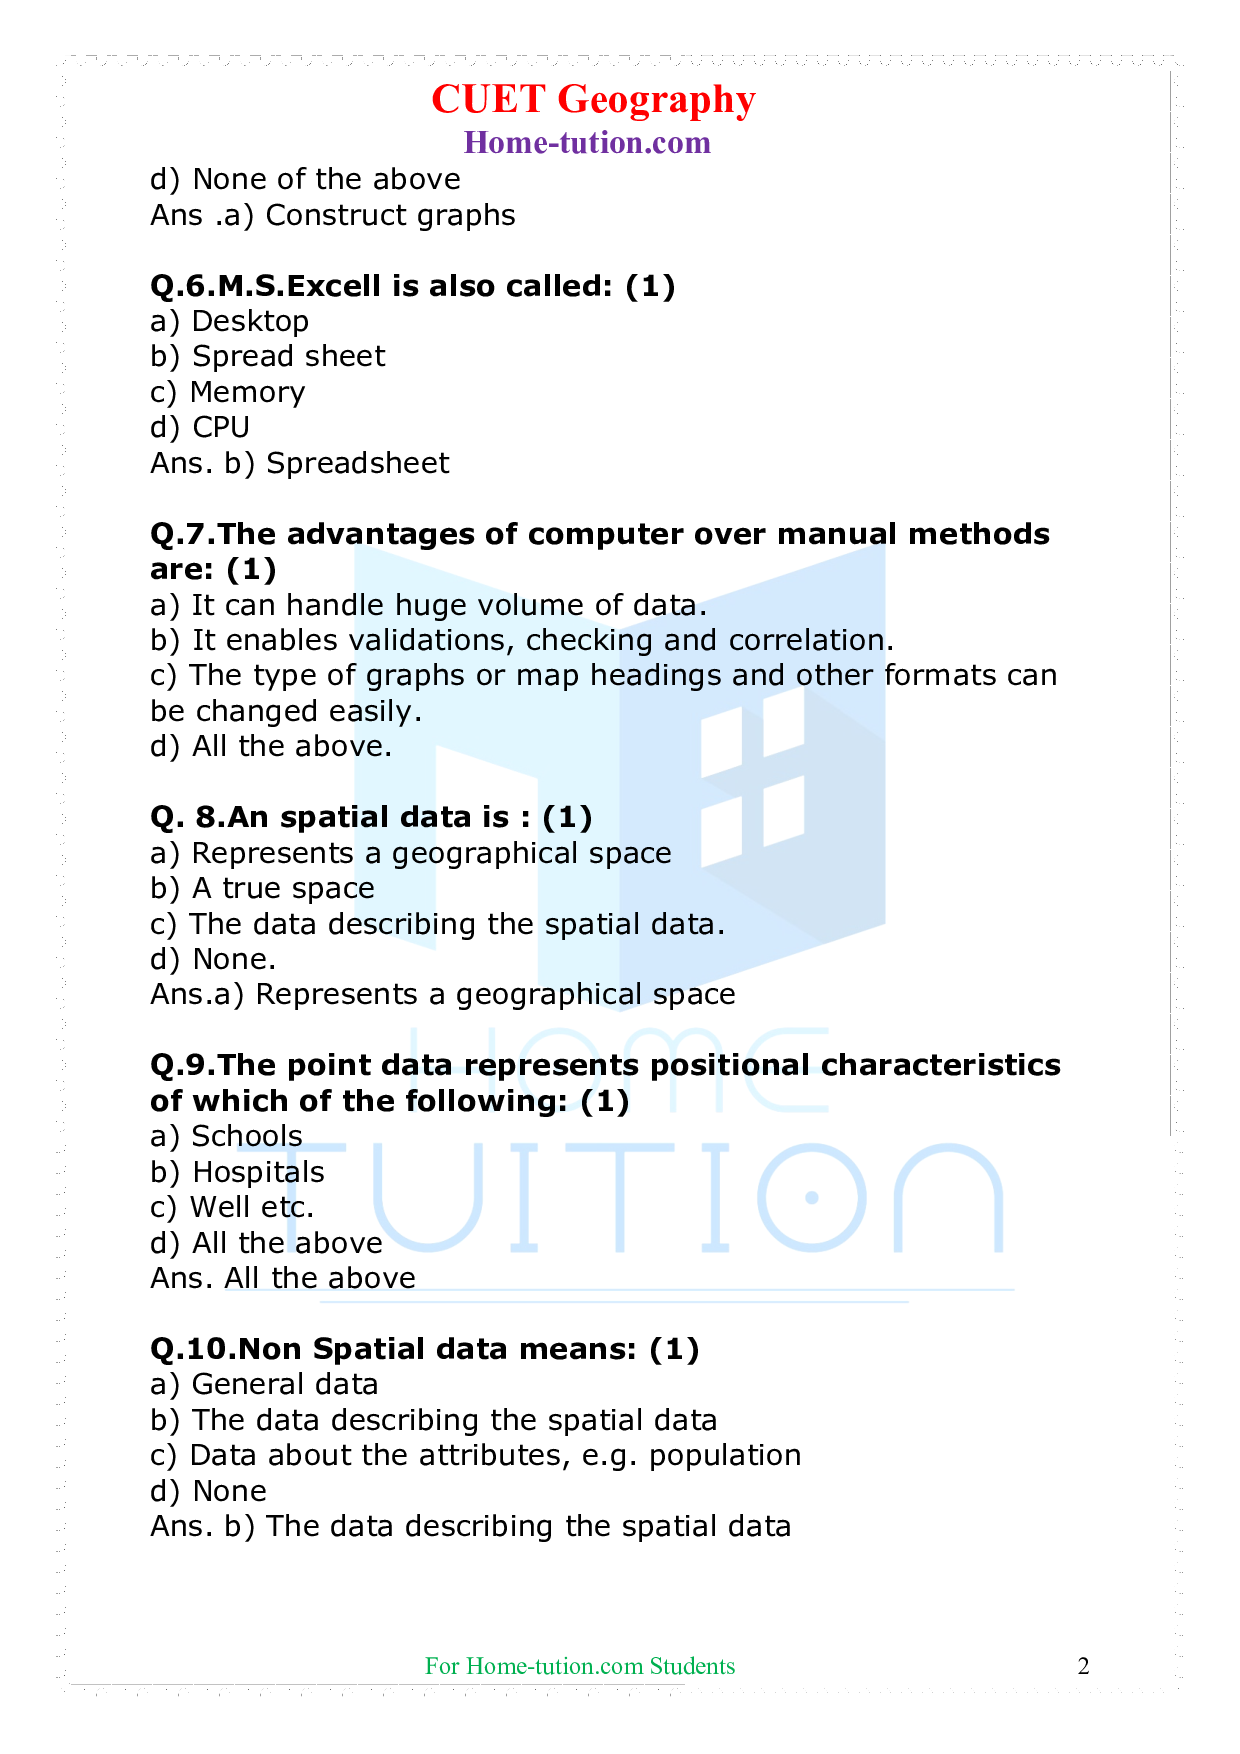 MCQ Questions For CUET Geography Chapter 4 Use of Computer in Data Processing and Mapping